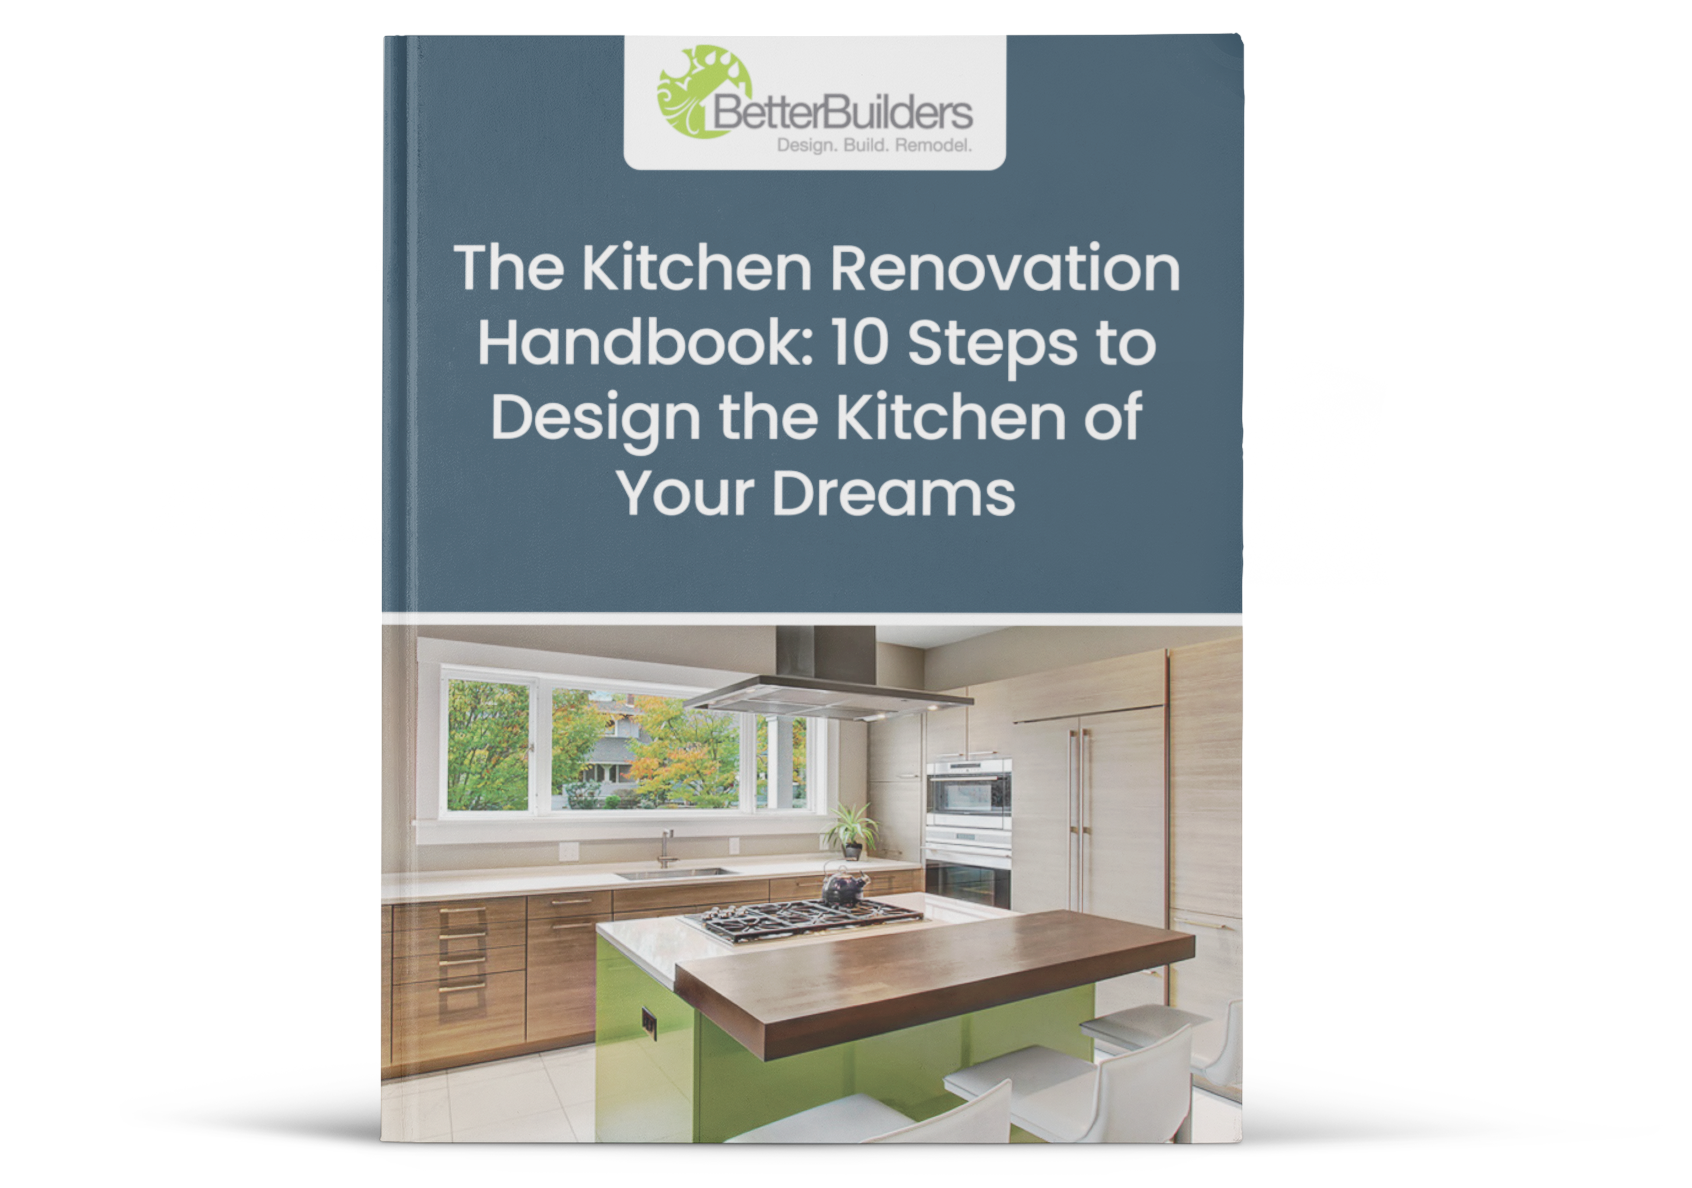 The Kitchen Renovation Handbook: 10 Steps to Design the Kitchen of Your Dreams